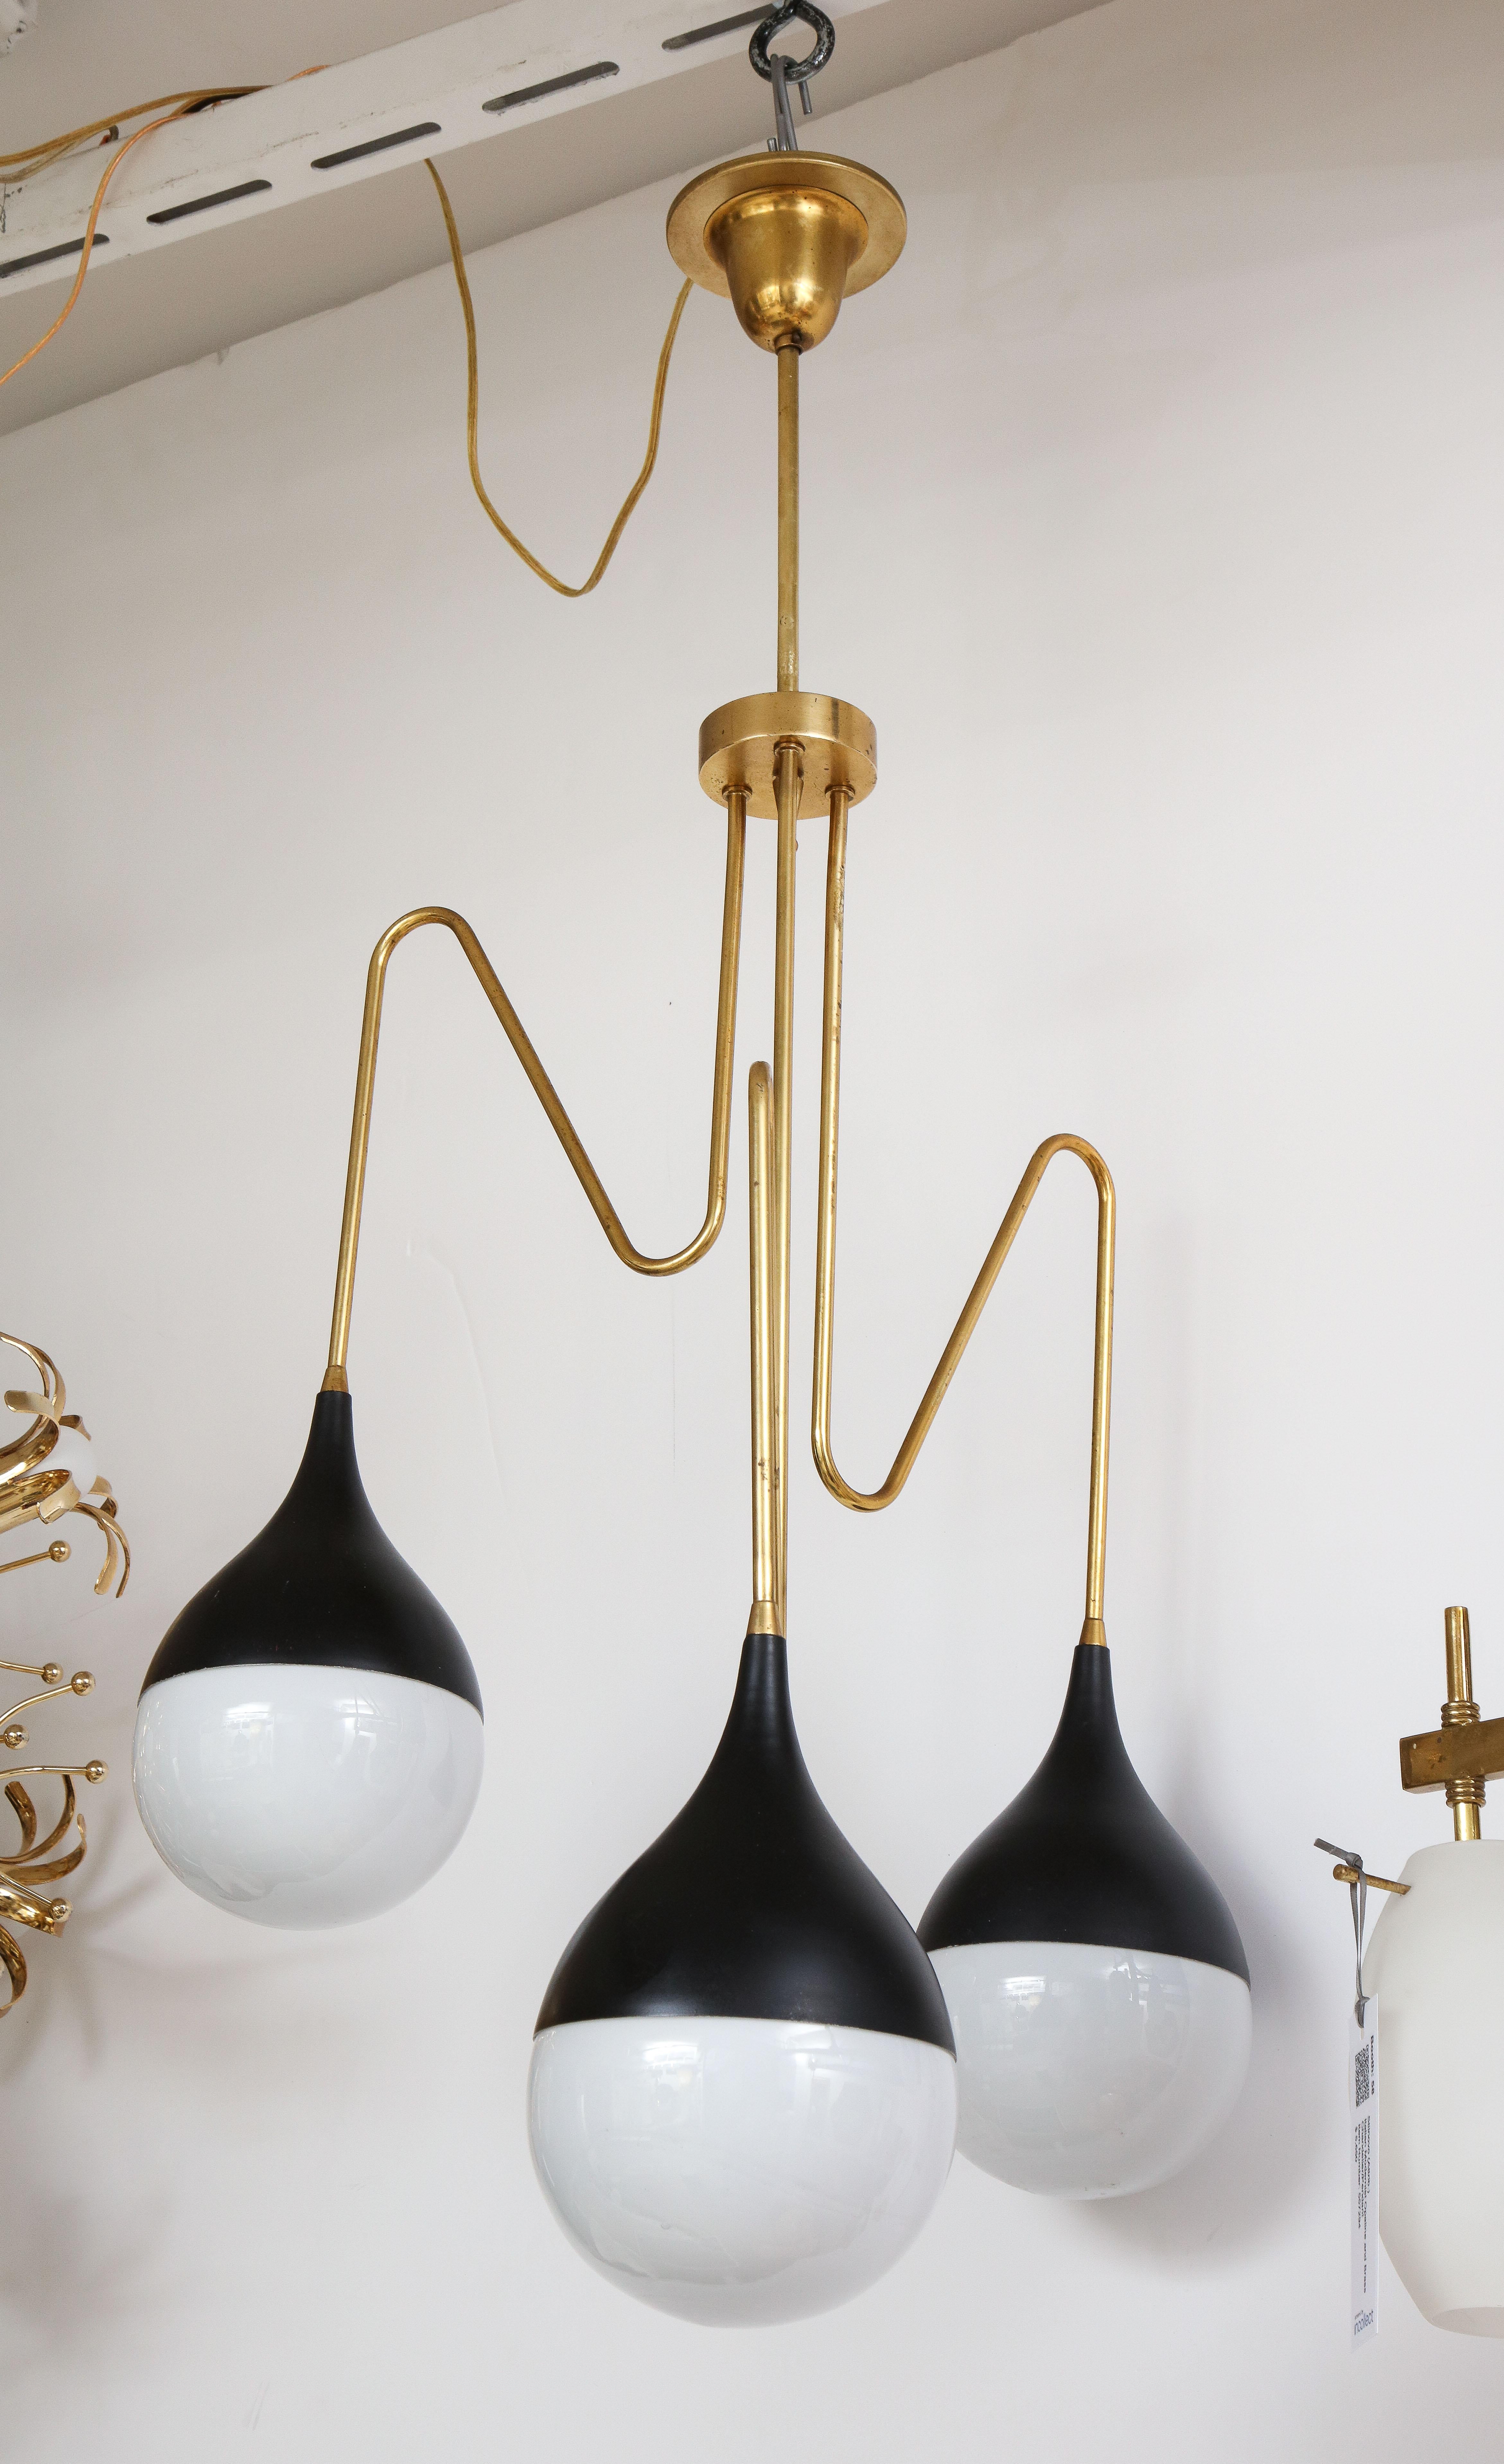 Mid-20th Century Italian 1950's Brass and Glass Three Light Chandelier For Sale